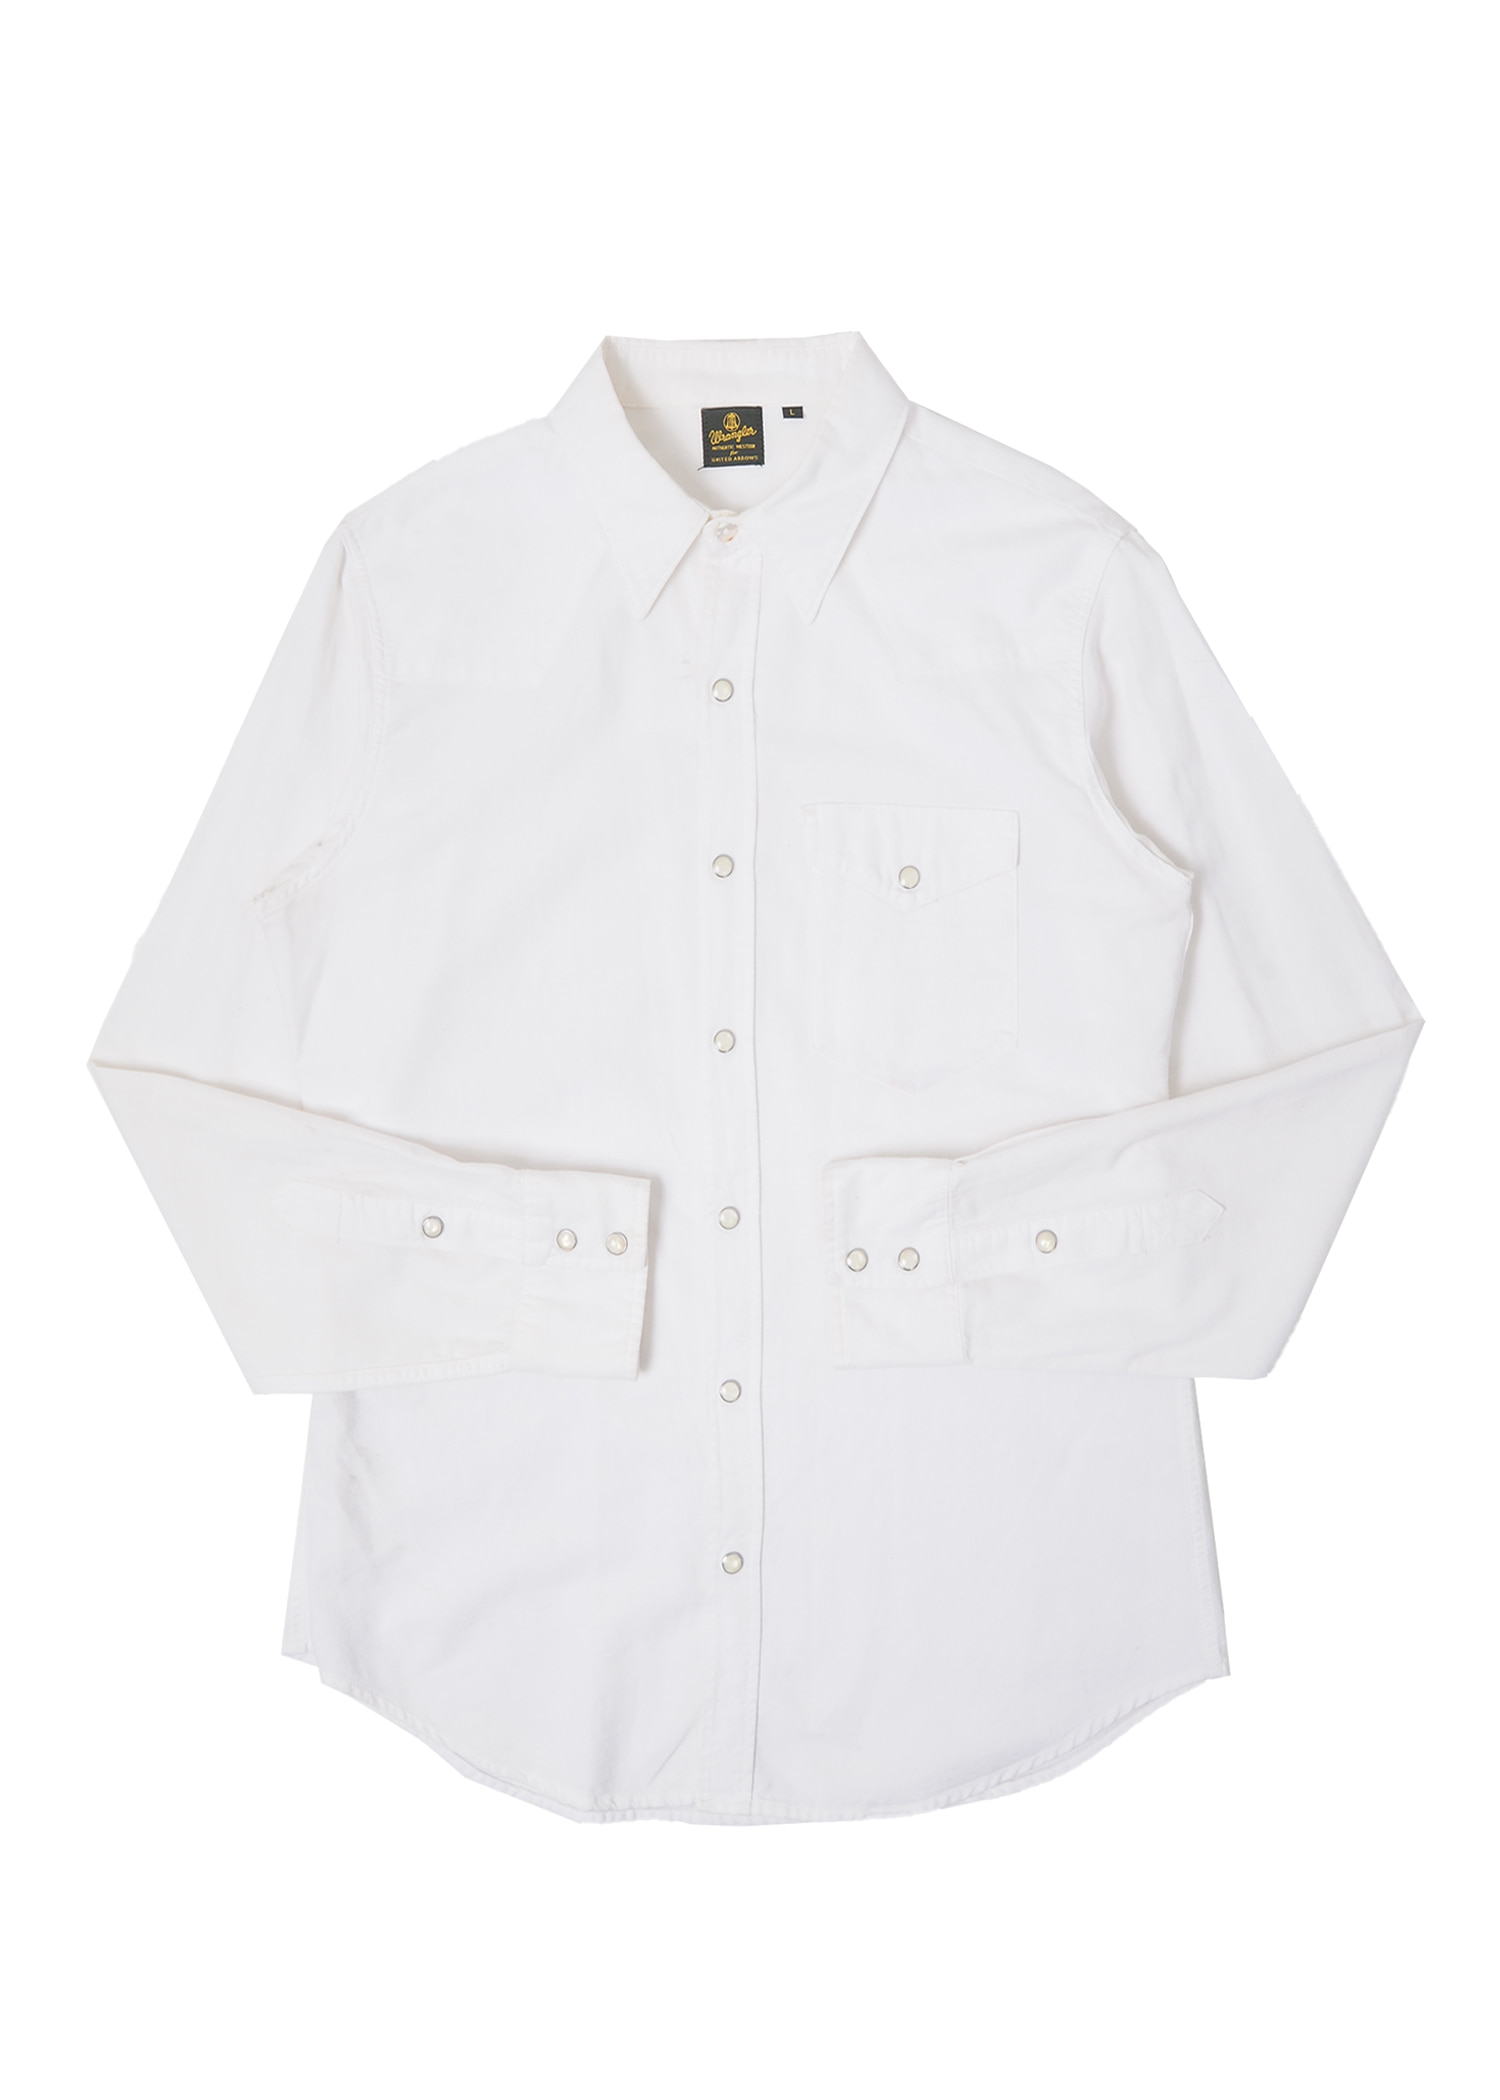 Wrangler for UNITED ARROWS western shirts